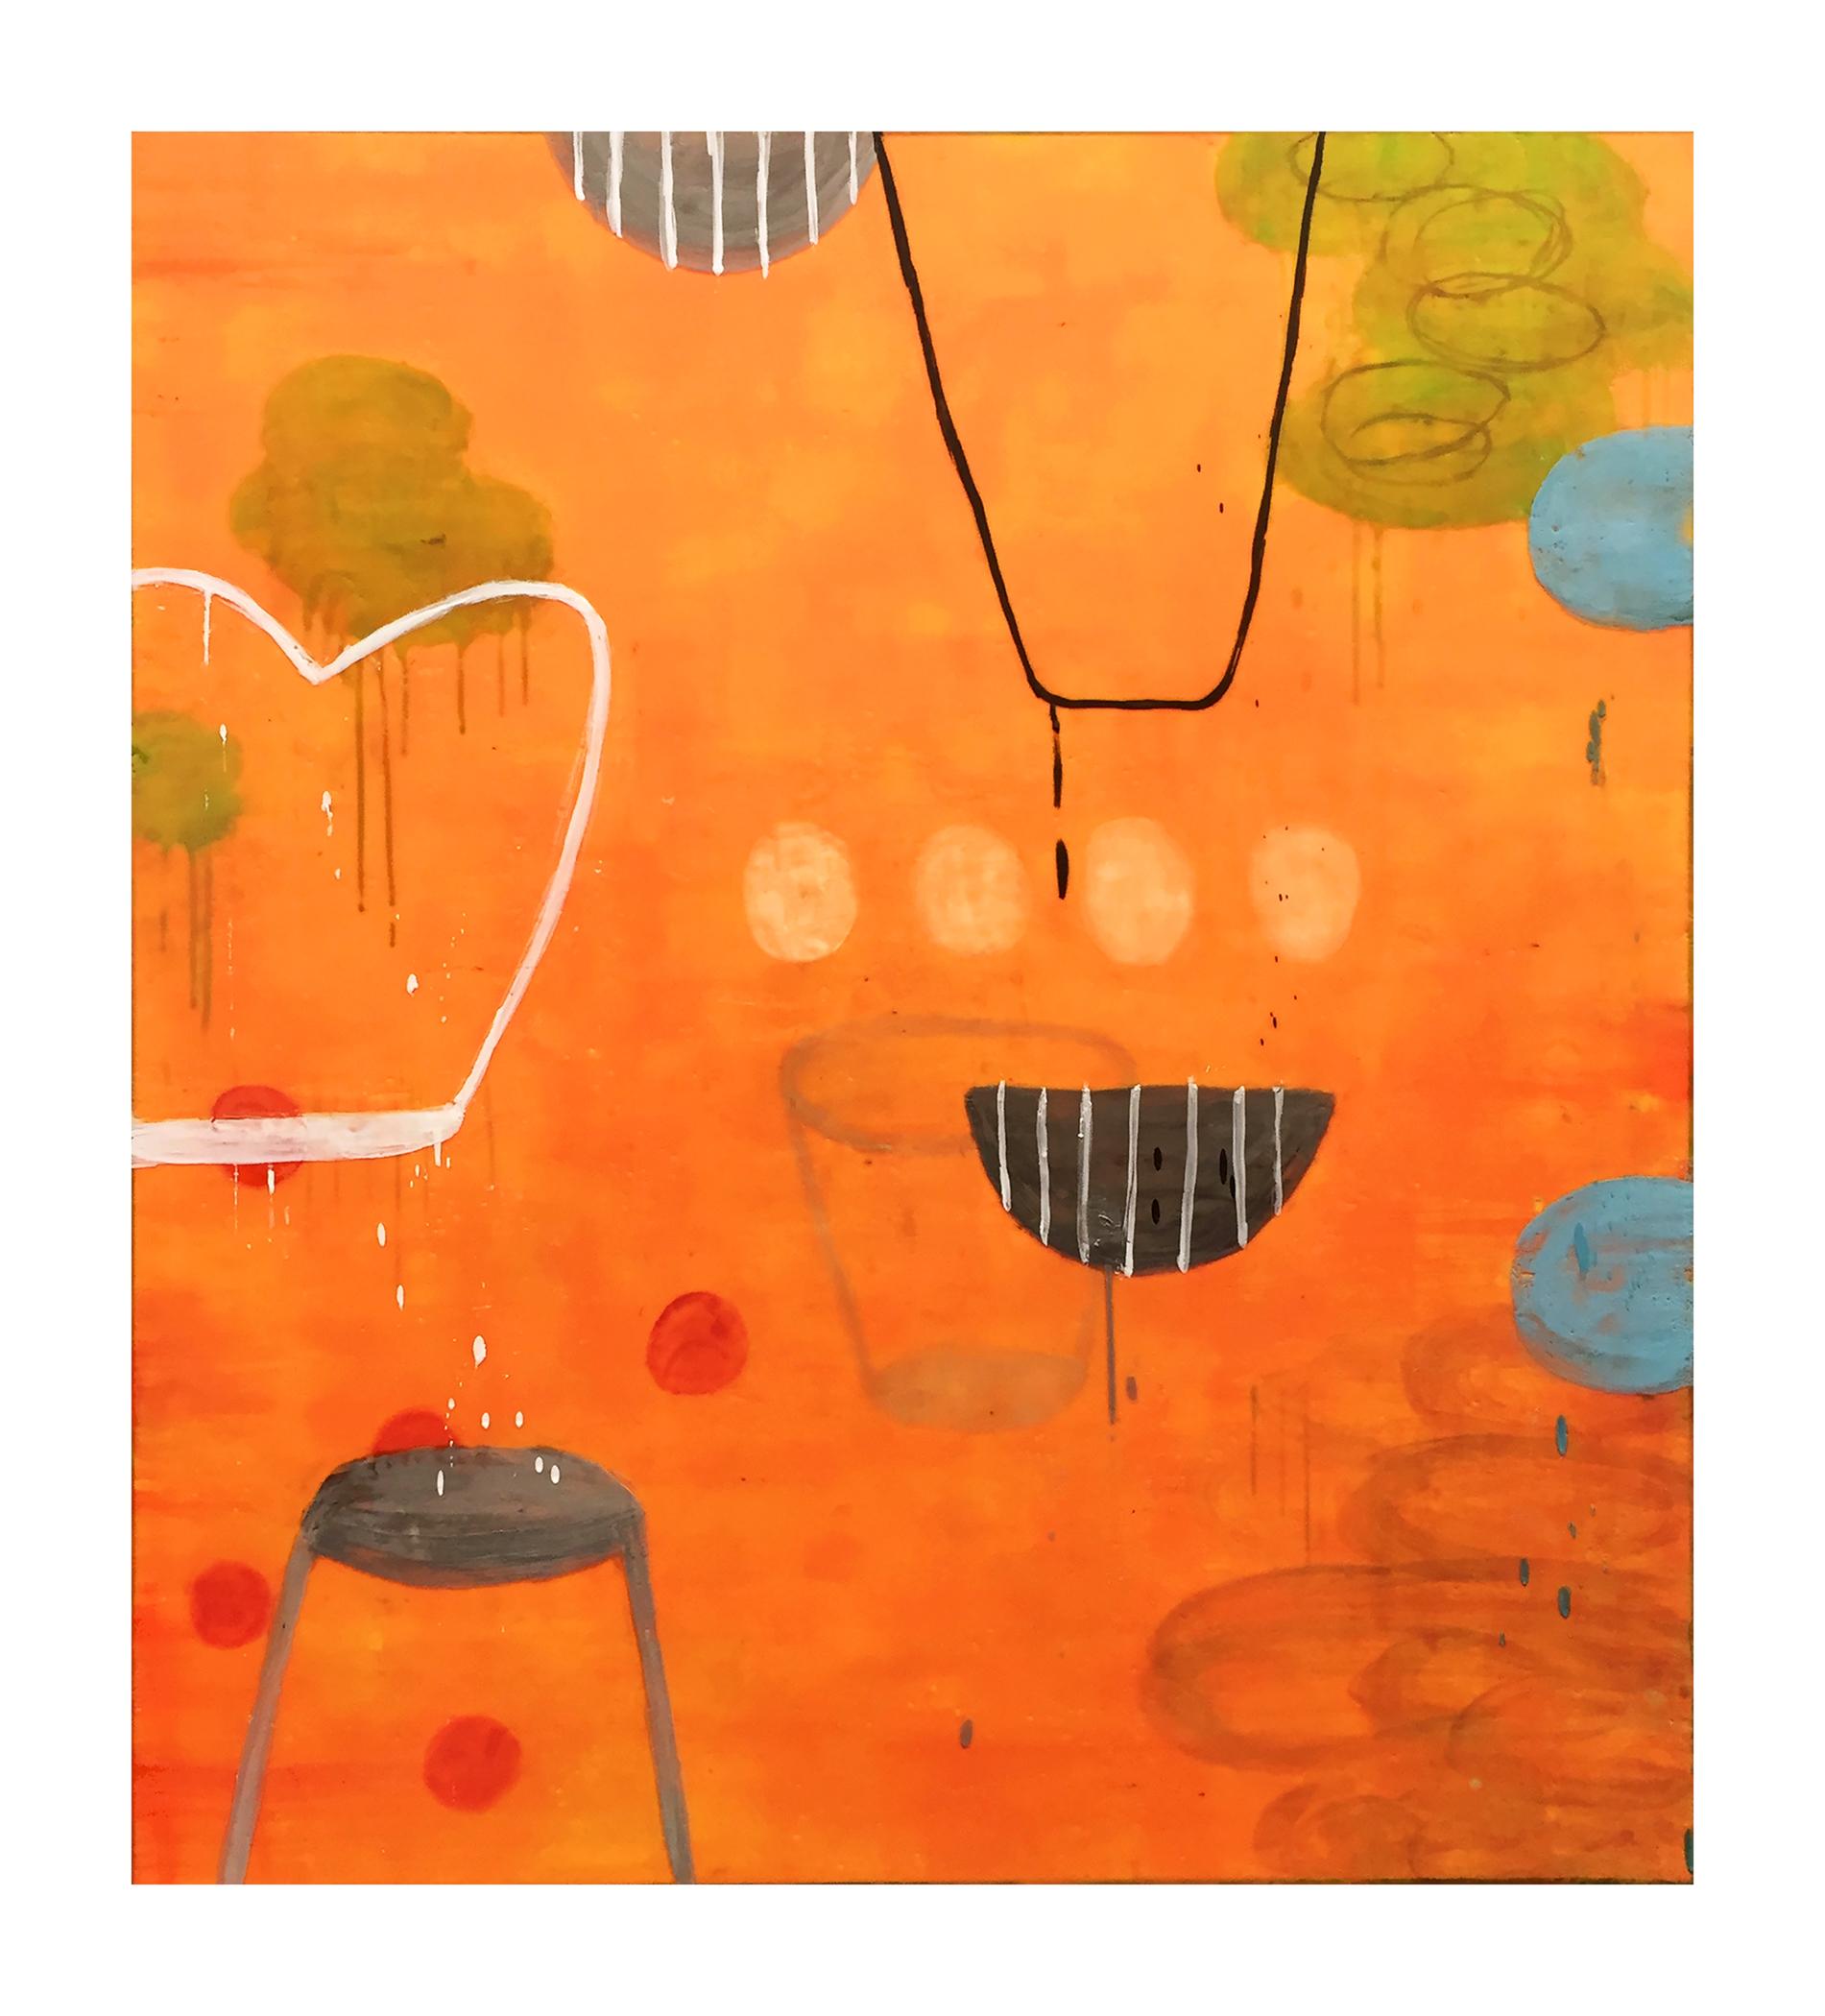 Untitled NZ 256 - Painting by Rana Rochat